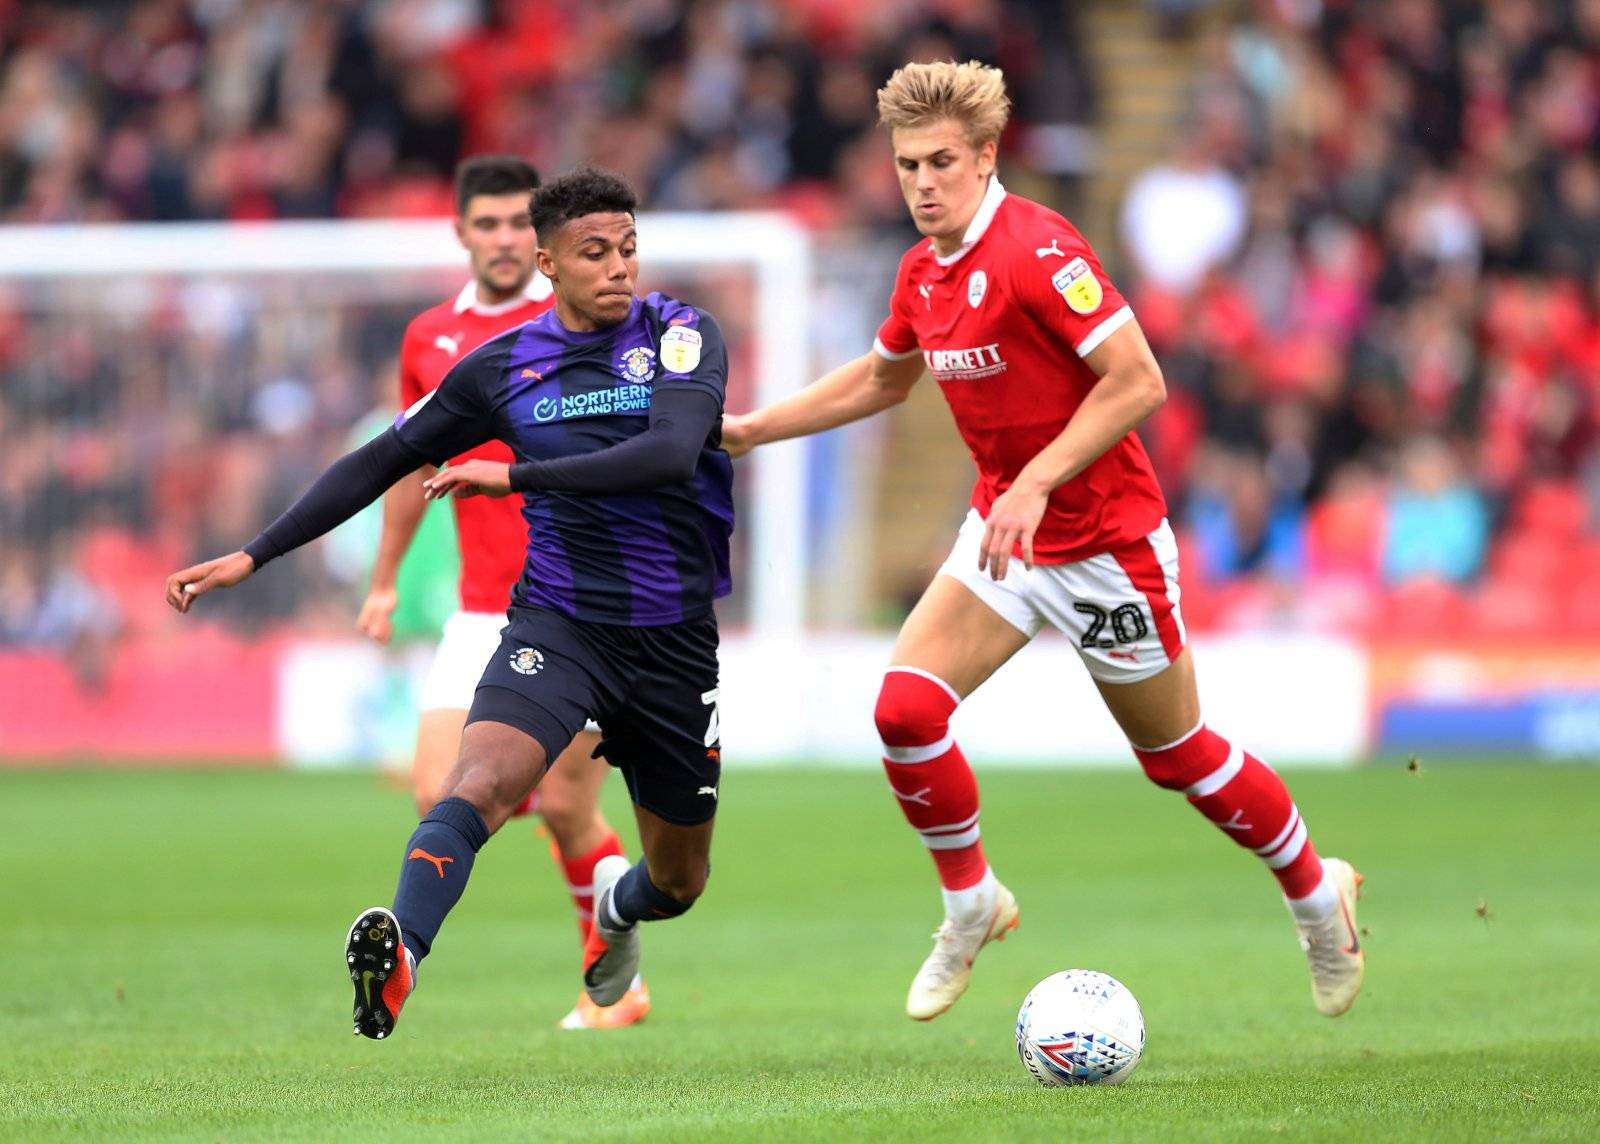 Luton Town: Hatters must fight off Premier League interest to keep hold of James Justin - Luton Town News